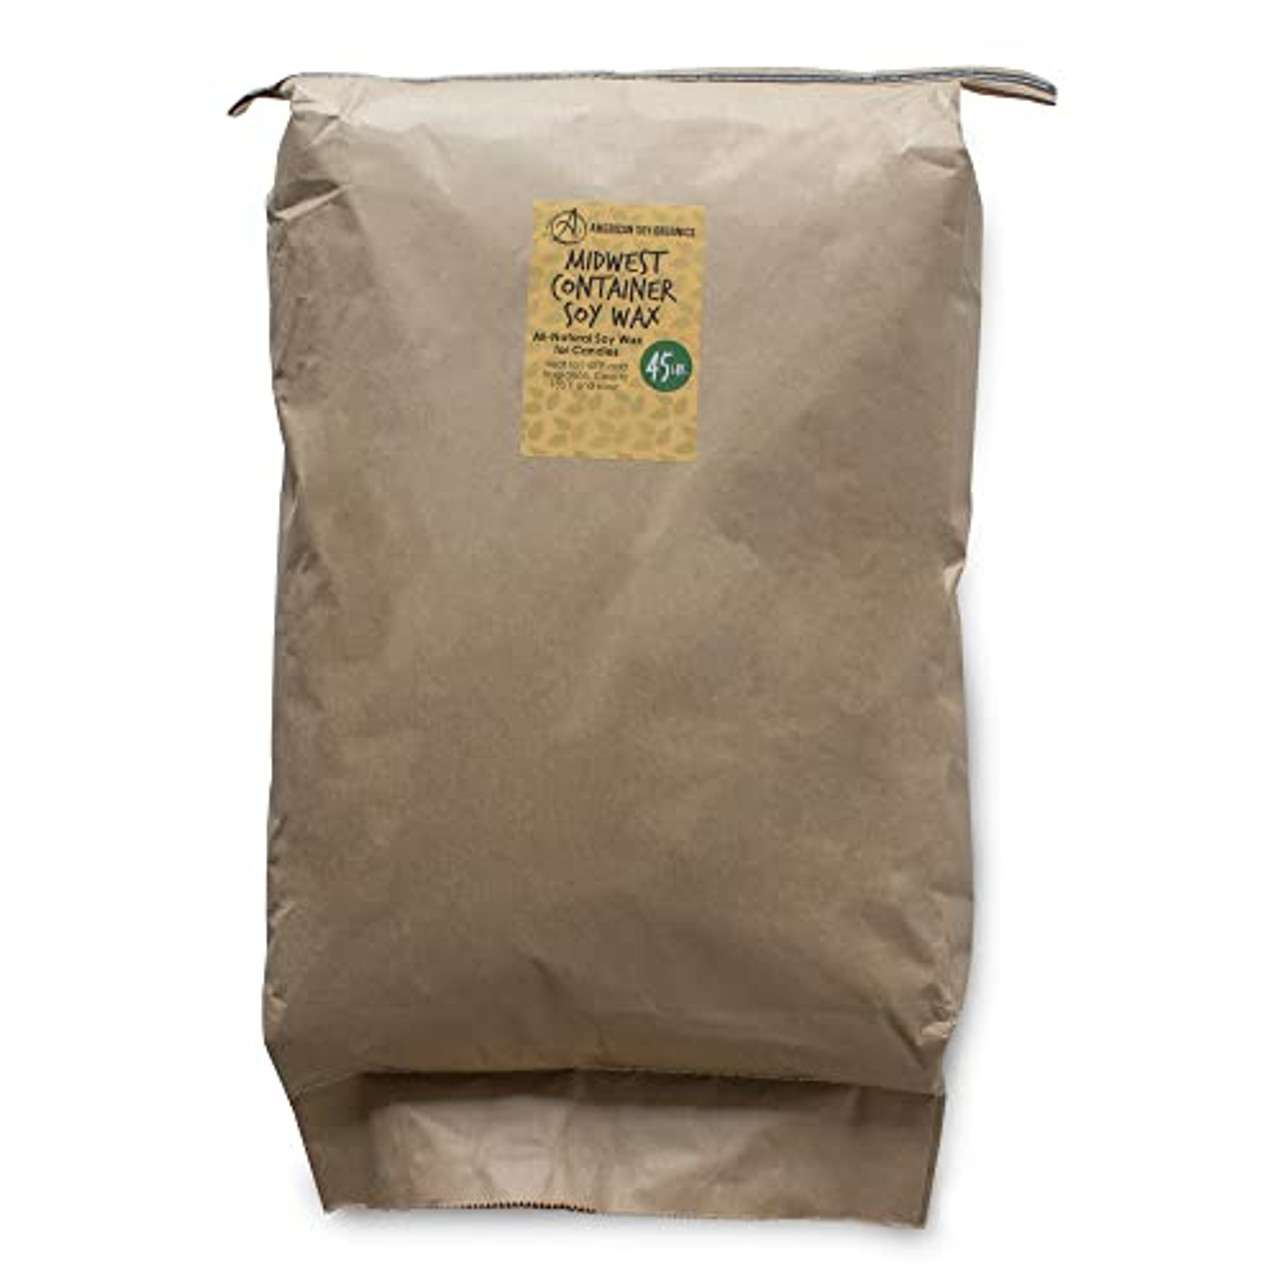 American Soy Organics - 100% Midwest Soy Container Wax Beads for Candle  Making, 10 lb Bag 10 pound bag